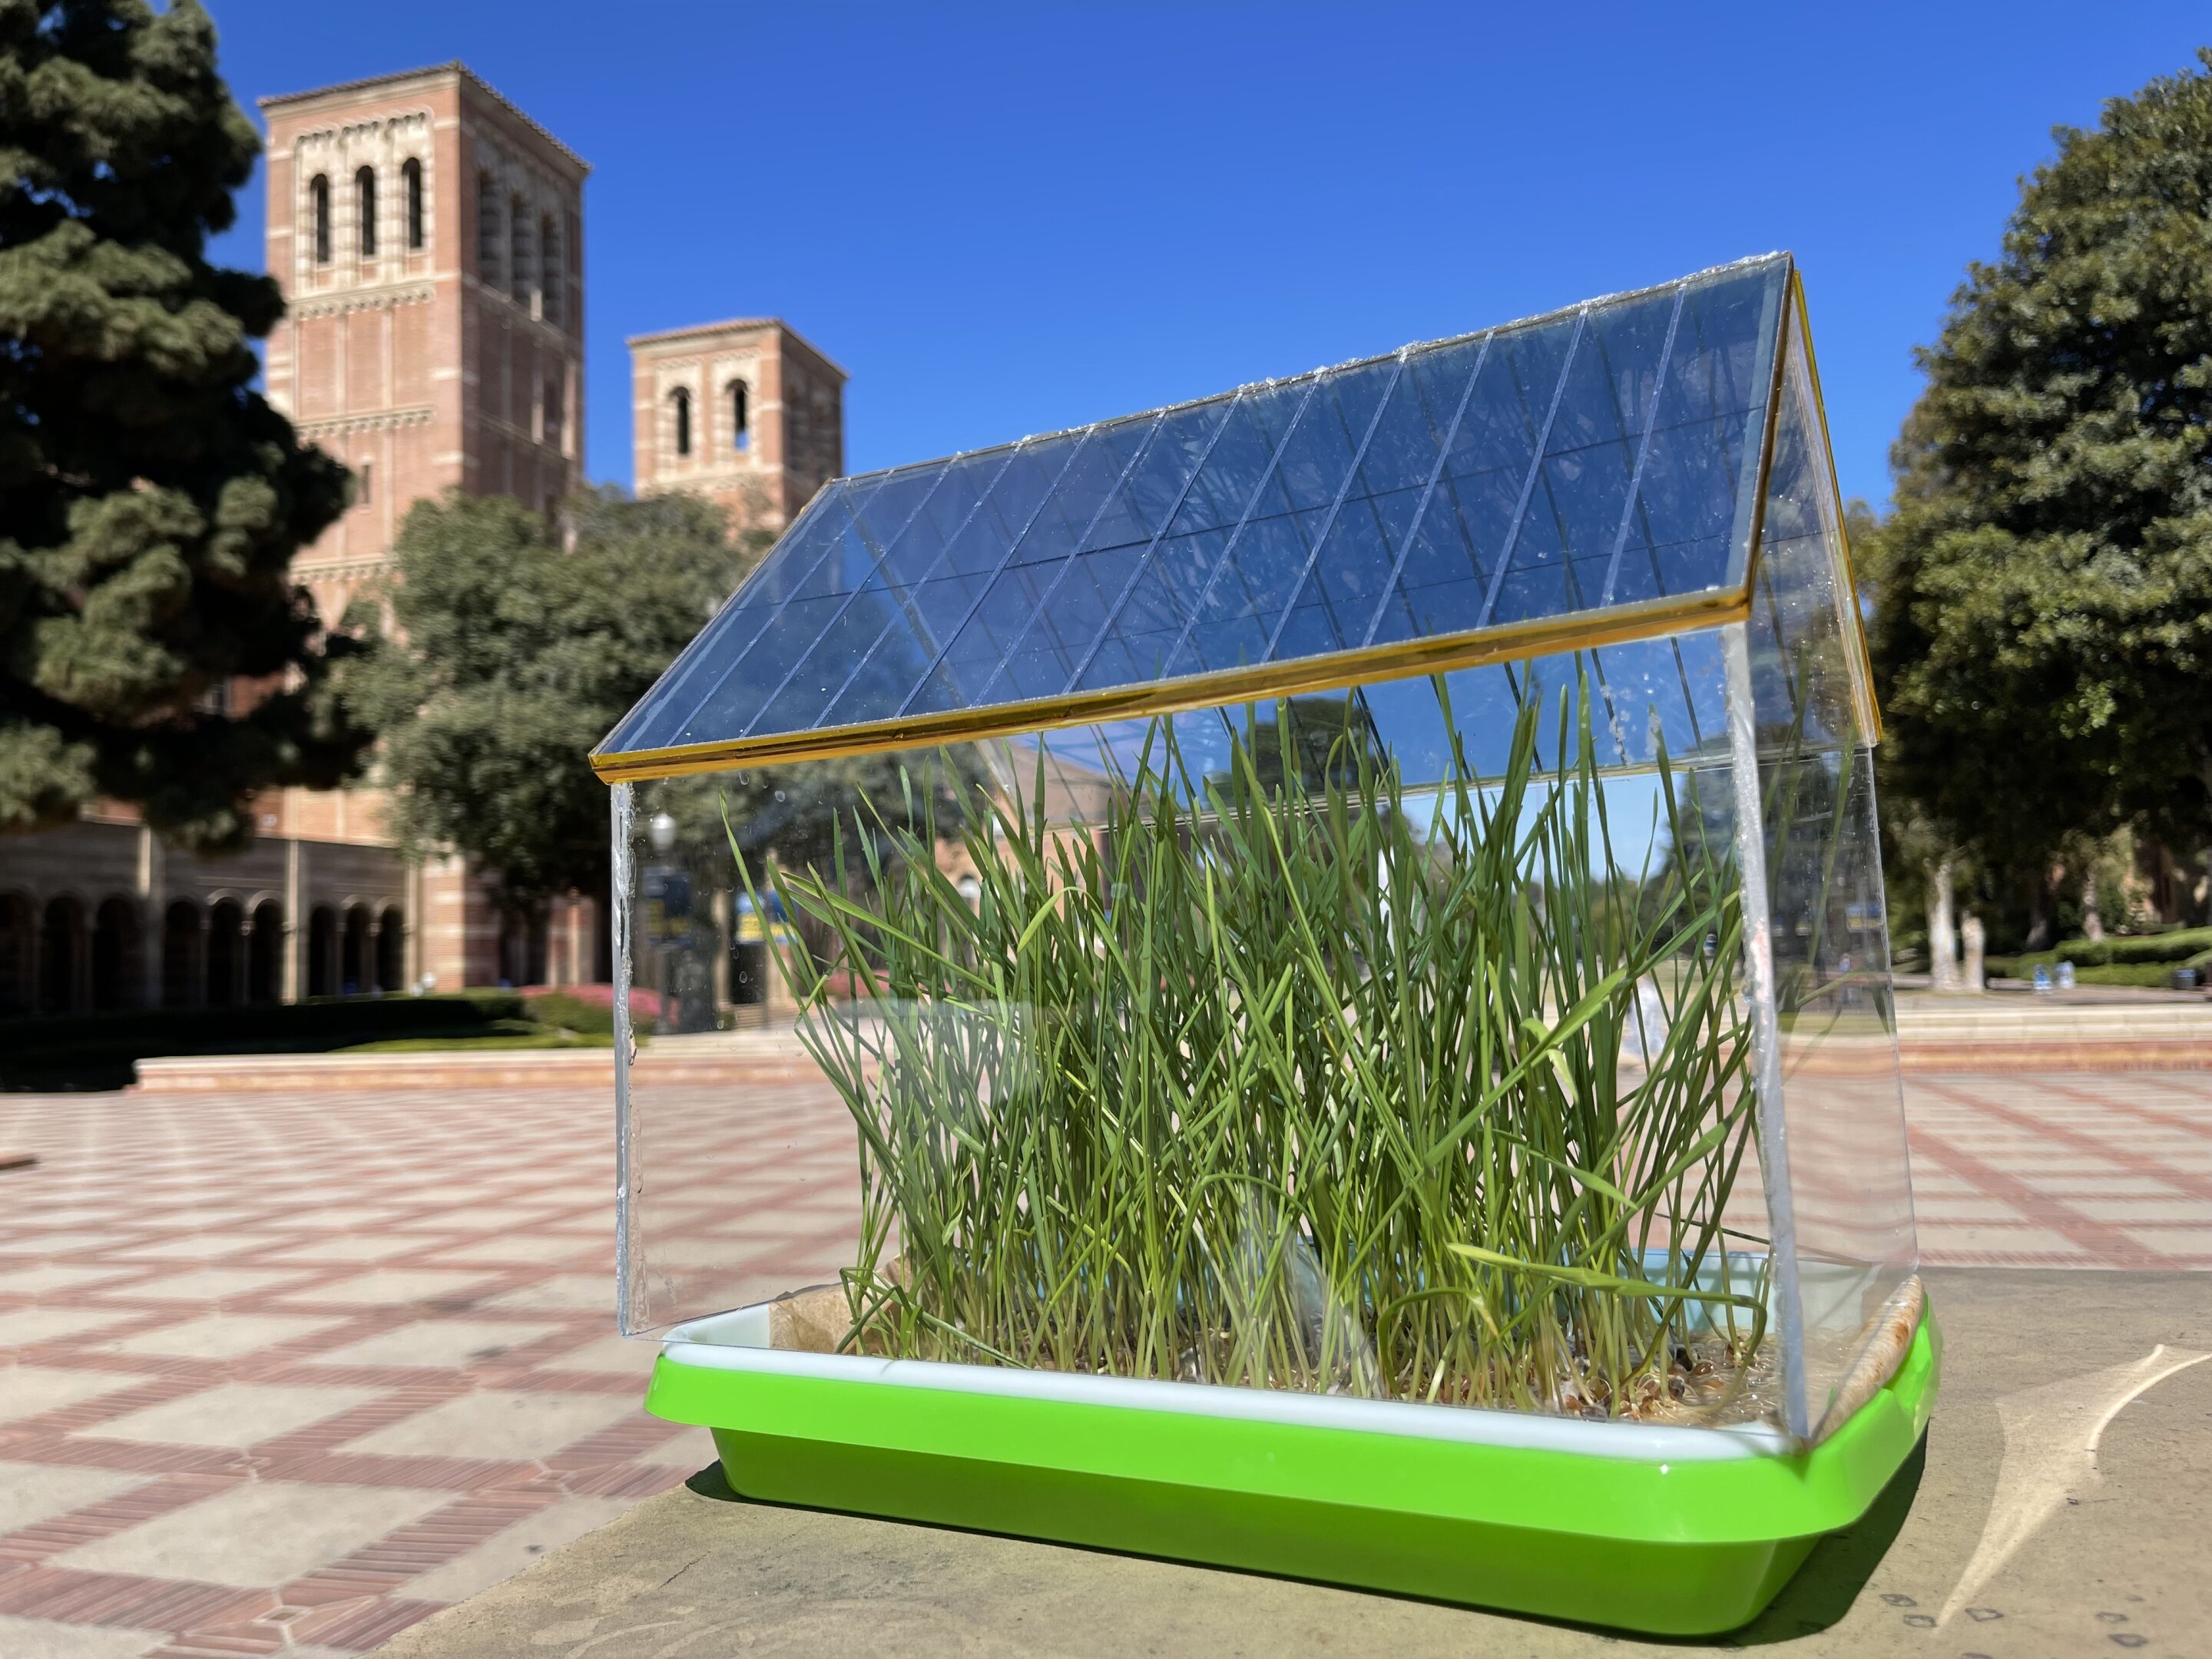 Engineers design solar roofs to harvest energy for greenhouses